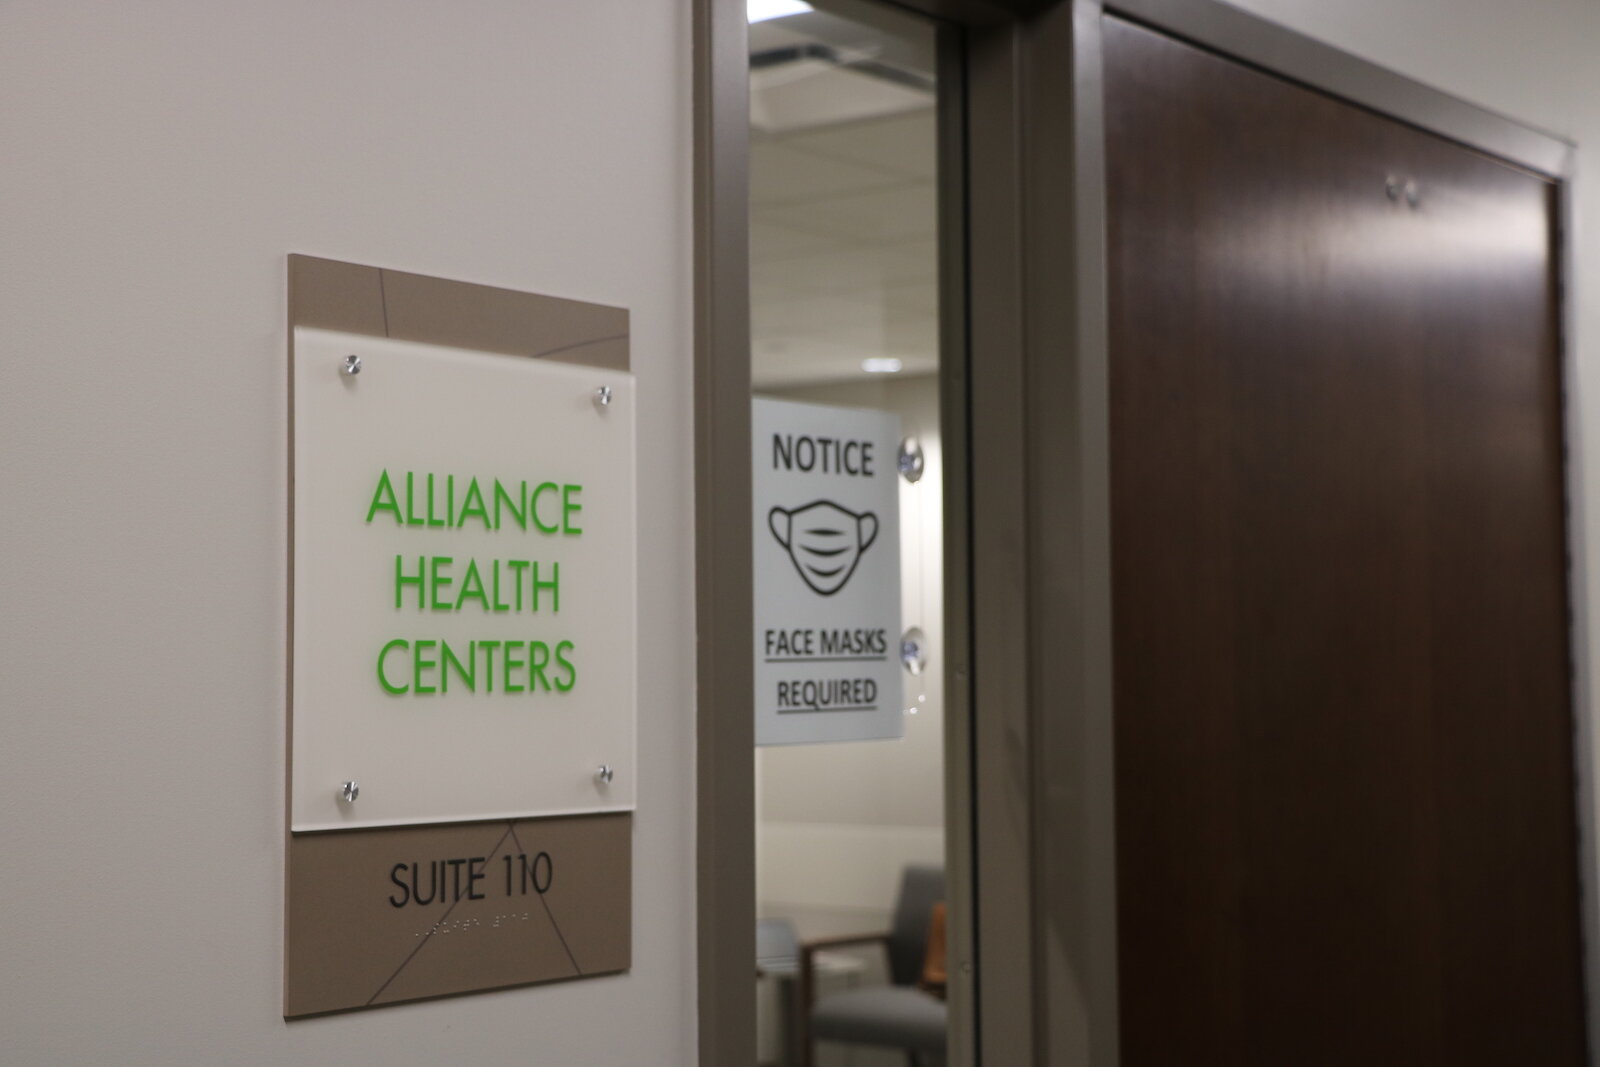 Alliance Health Centers is located at 2700 Lafayette St., #110, inside the Lafayette Medical Center in Southeast Fort Wayne